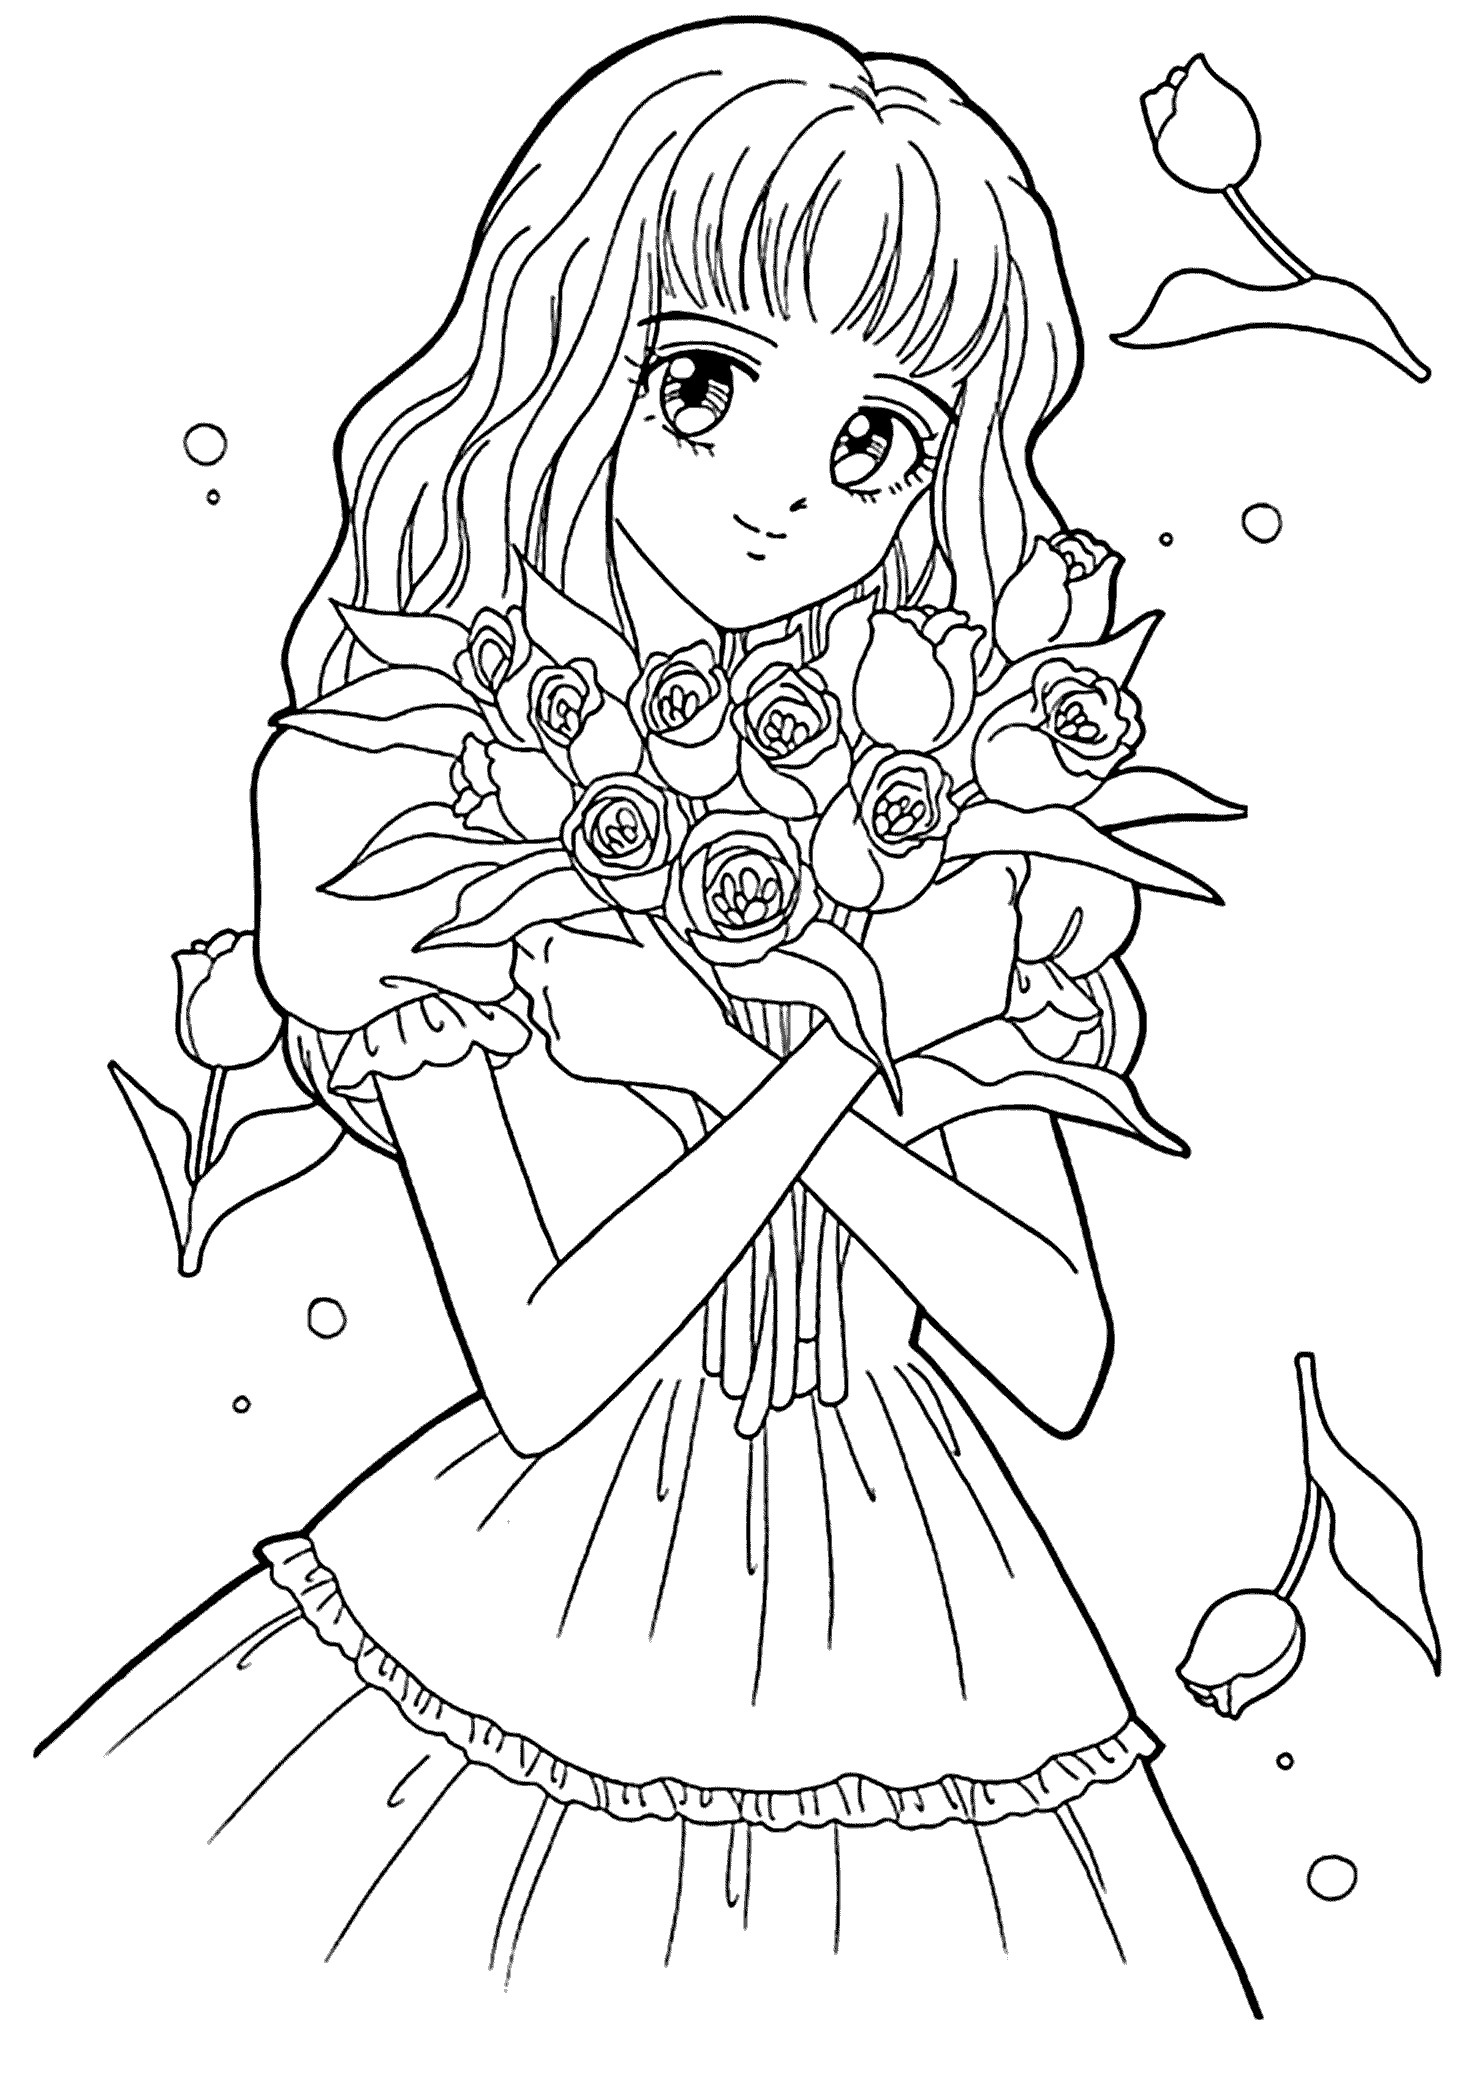 Cute Coloring Sheets For Girls
 Best Free Printable Coloring Pages for Kids and Teens